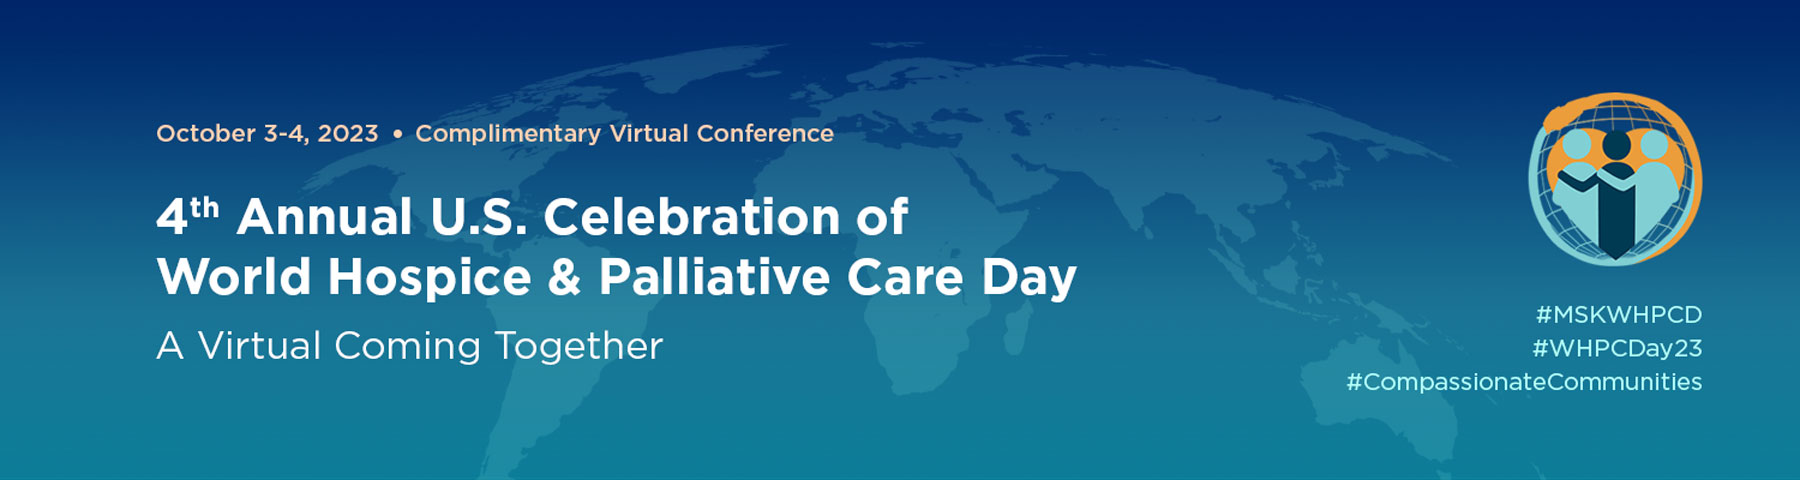 4th Annual U.S. Celebration of World Hospice & Palliative Care Day: A Virtual Coming Together Banner